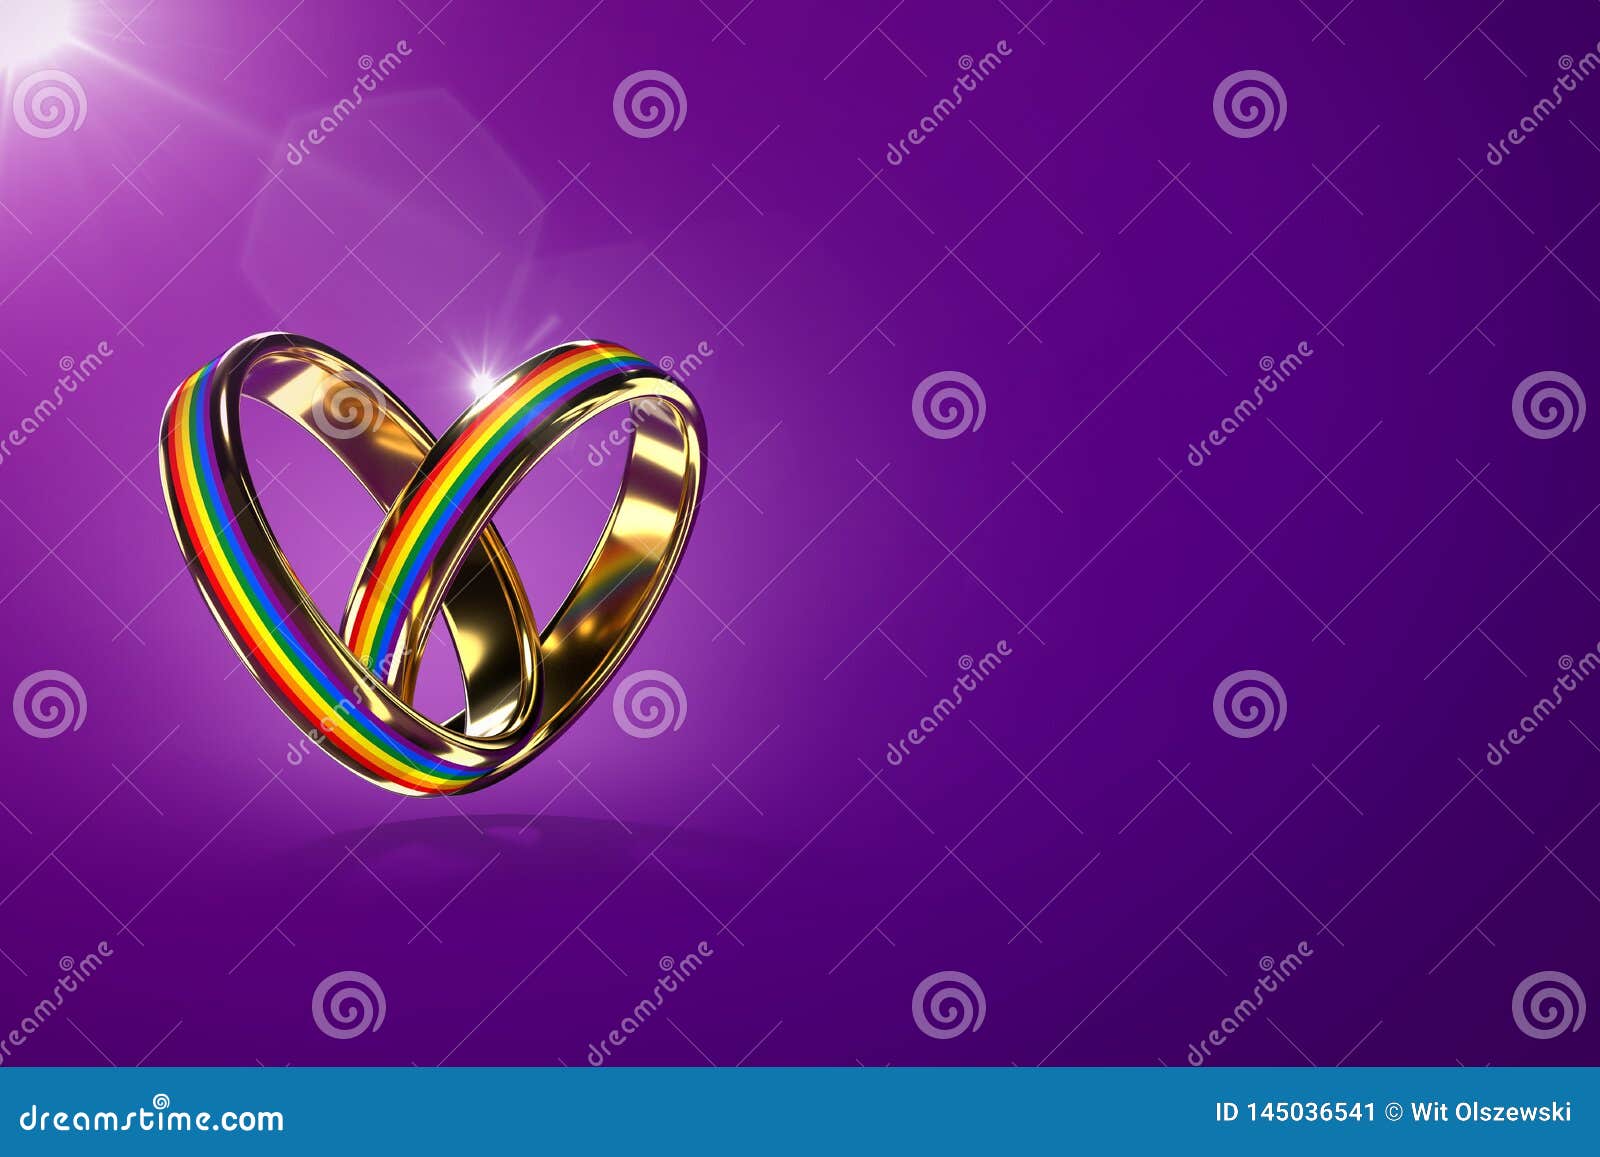 Two Hovering Wedding Rings With Rainbow Colors Isolated On